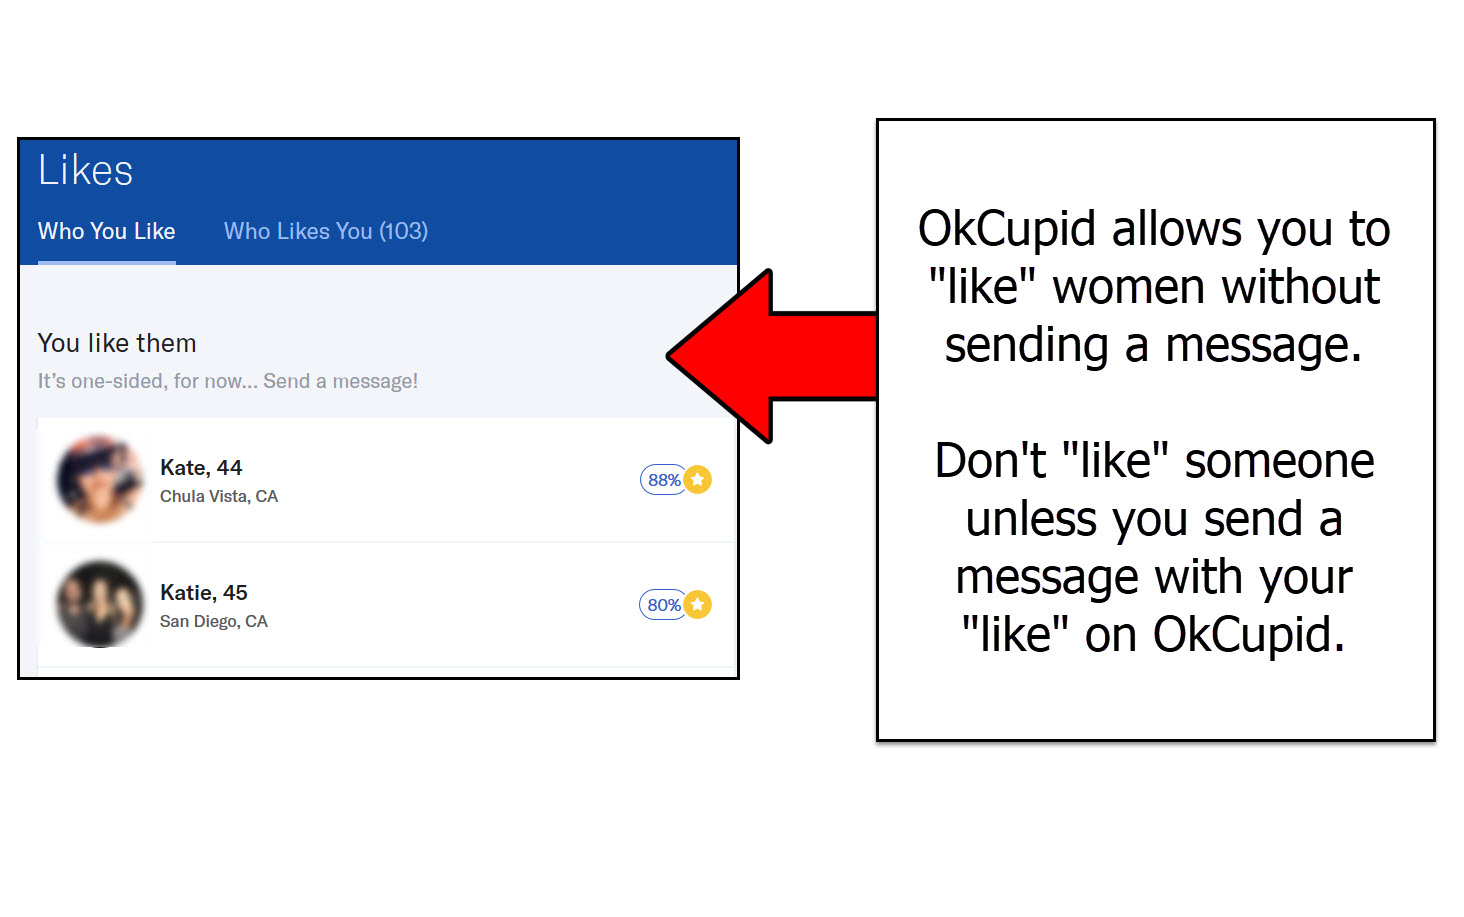 Where are OkCupid likes stored?